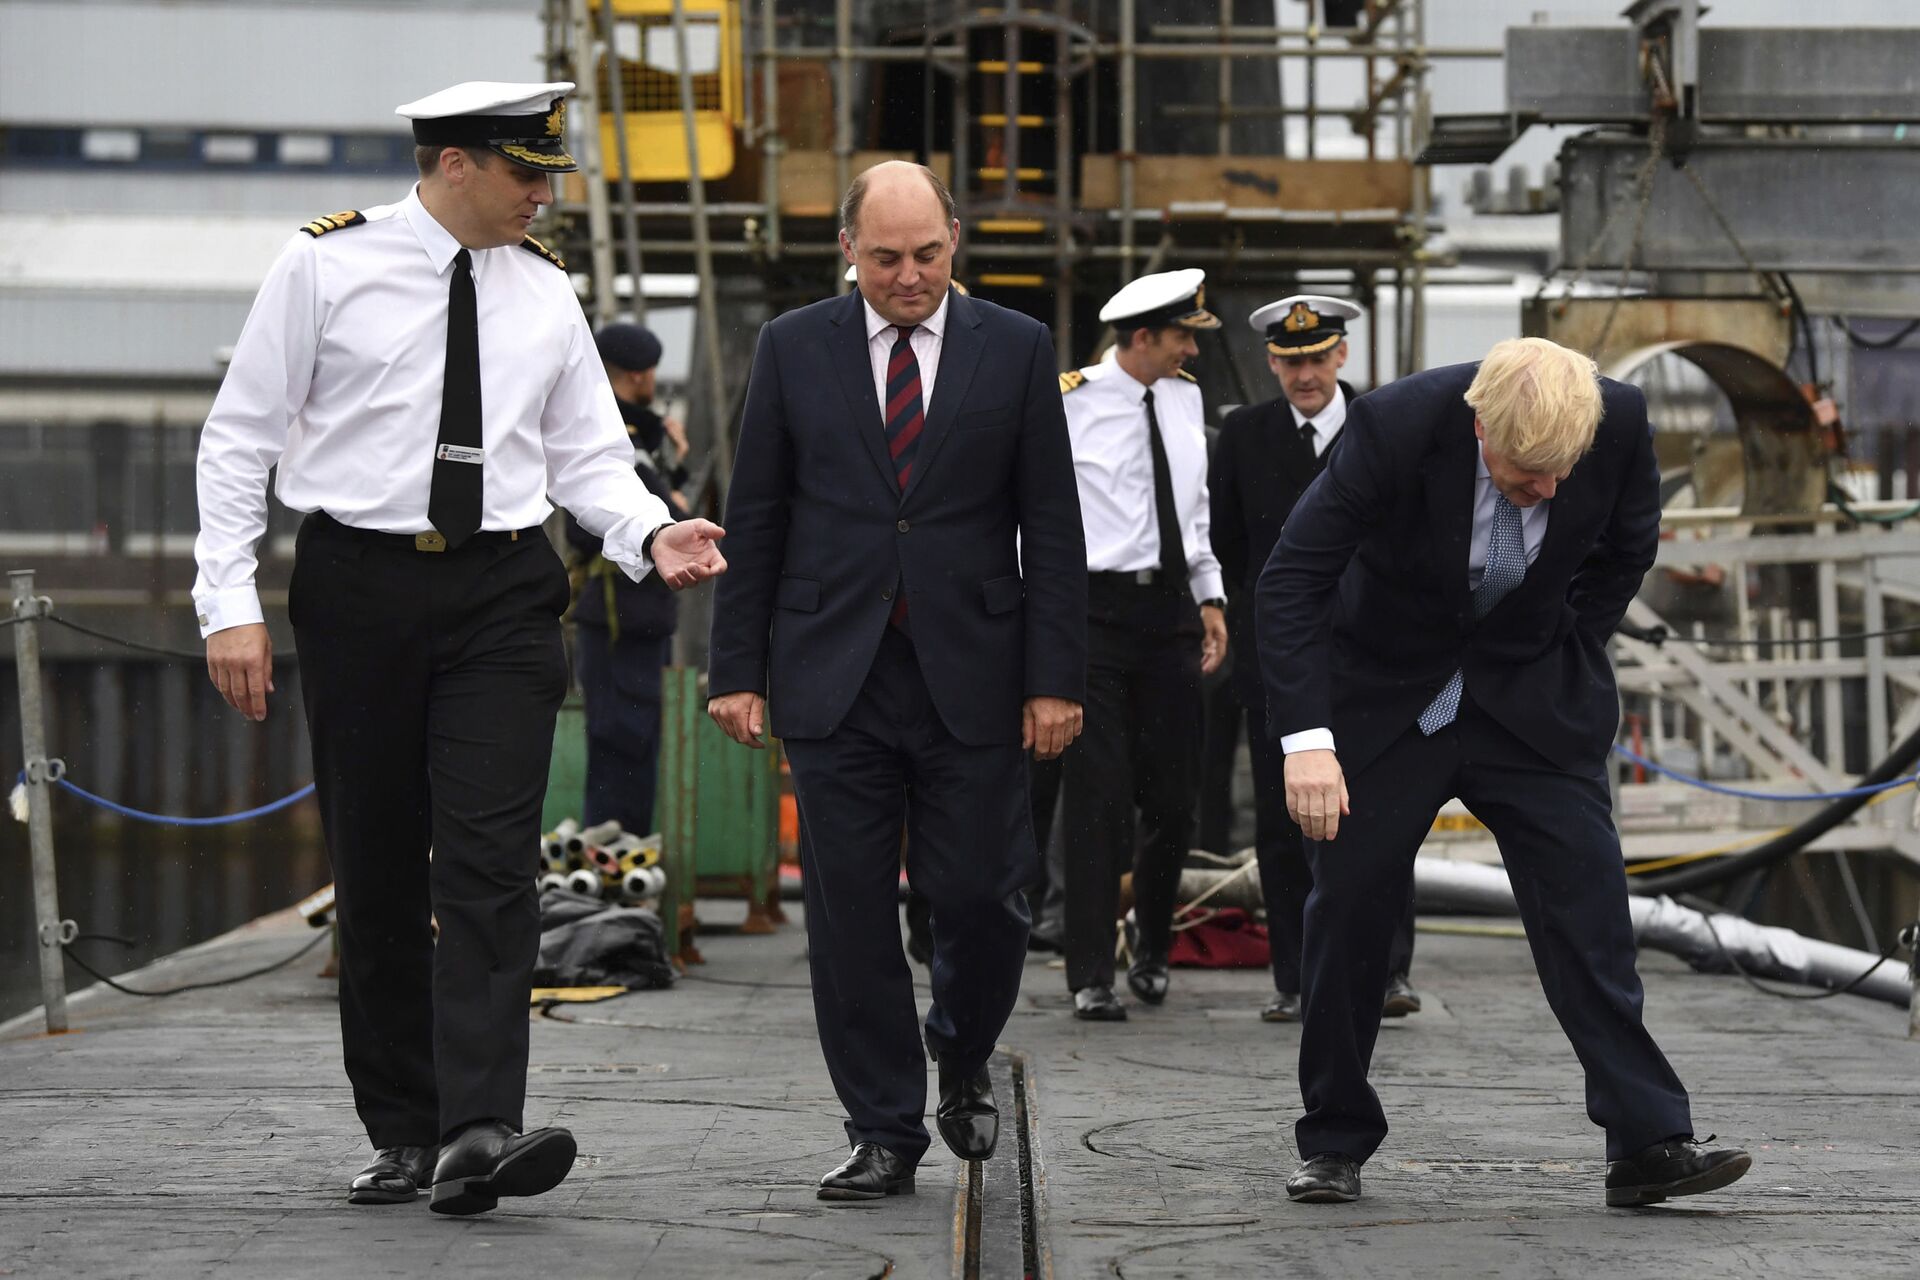 Britain's Prime Minister Boris Johnson, right,  visits HMS Victorious with Defence Secretary Ben Wallace, centre, accompanied by Commander Justin Codd at HM Naval Base Clyde in Faslane, Scotland. File photo. - Sputnik International, 1920, 07.09.2021